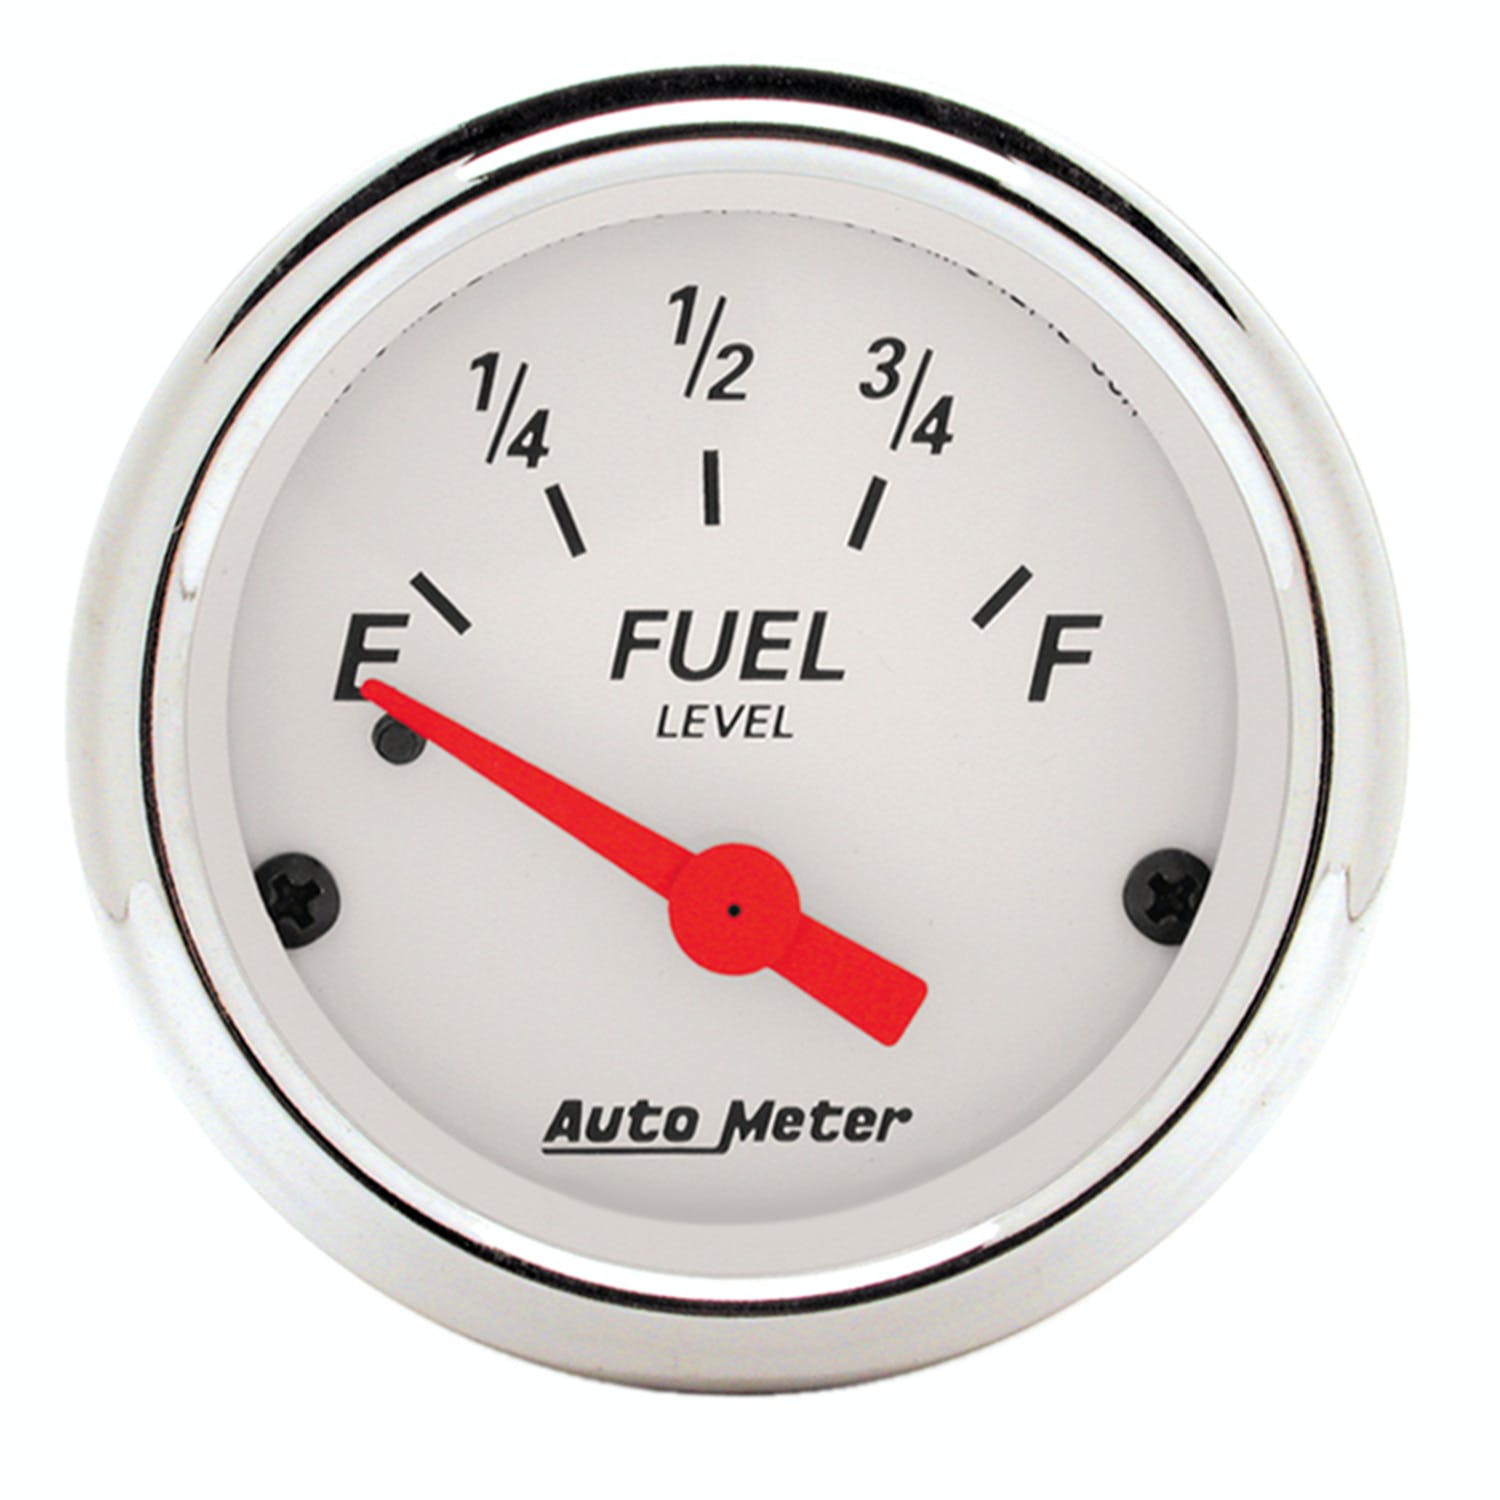 AutoMeter Products 1318 Arctic White Series Fuel Level Gauge (0ohm Empty, 30ohm Full, 2-1/16 in.)